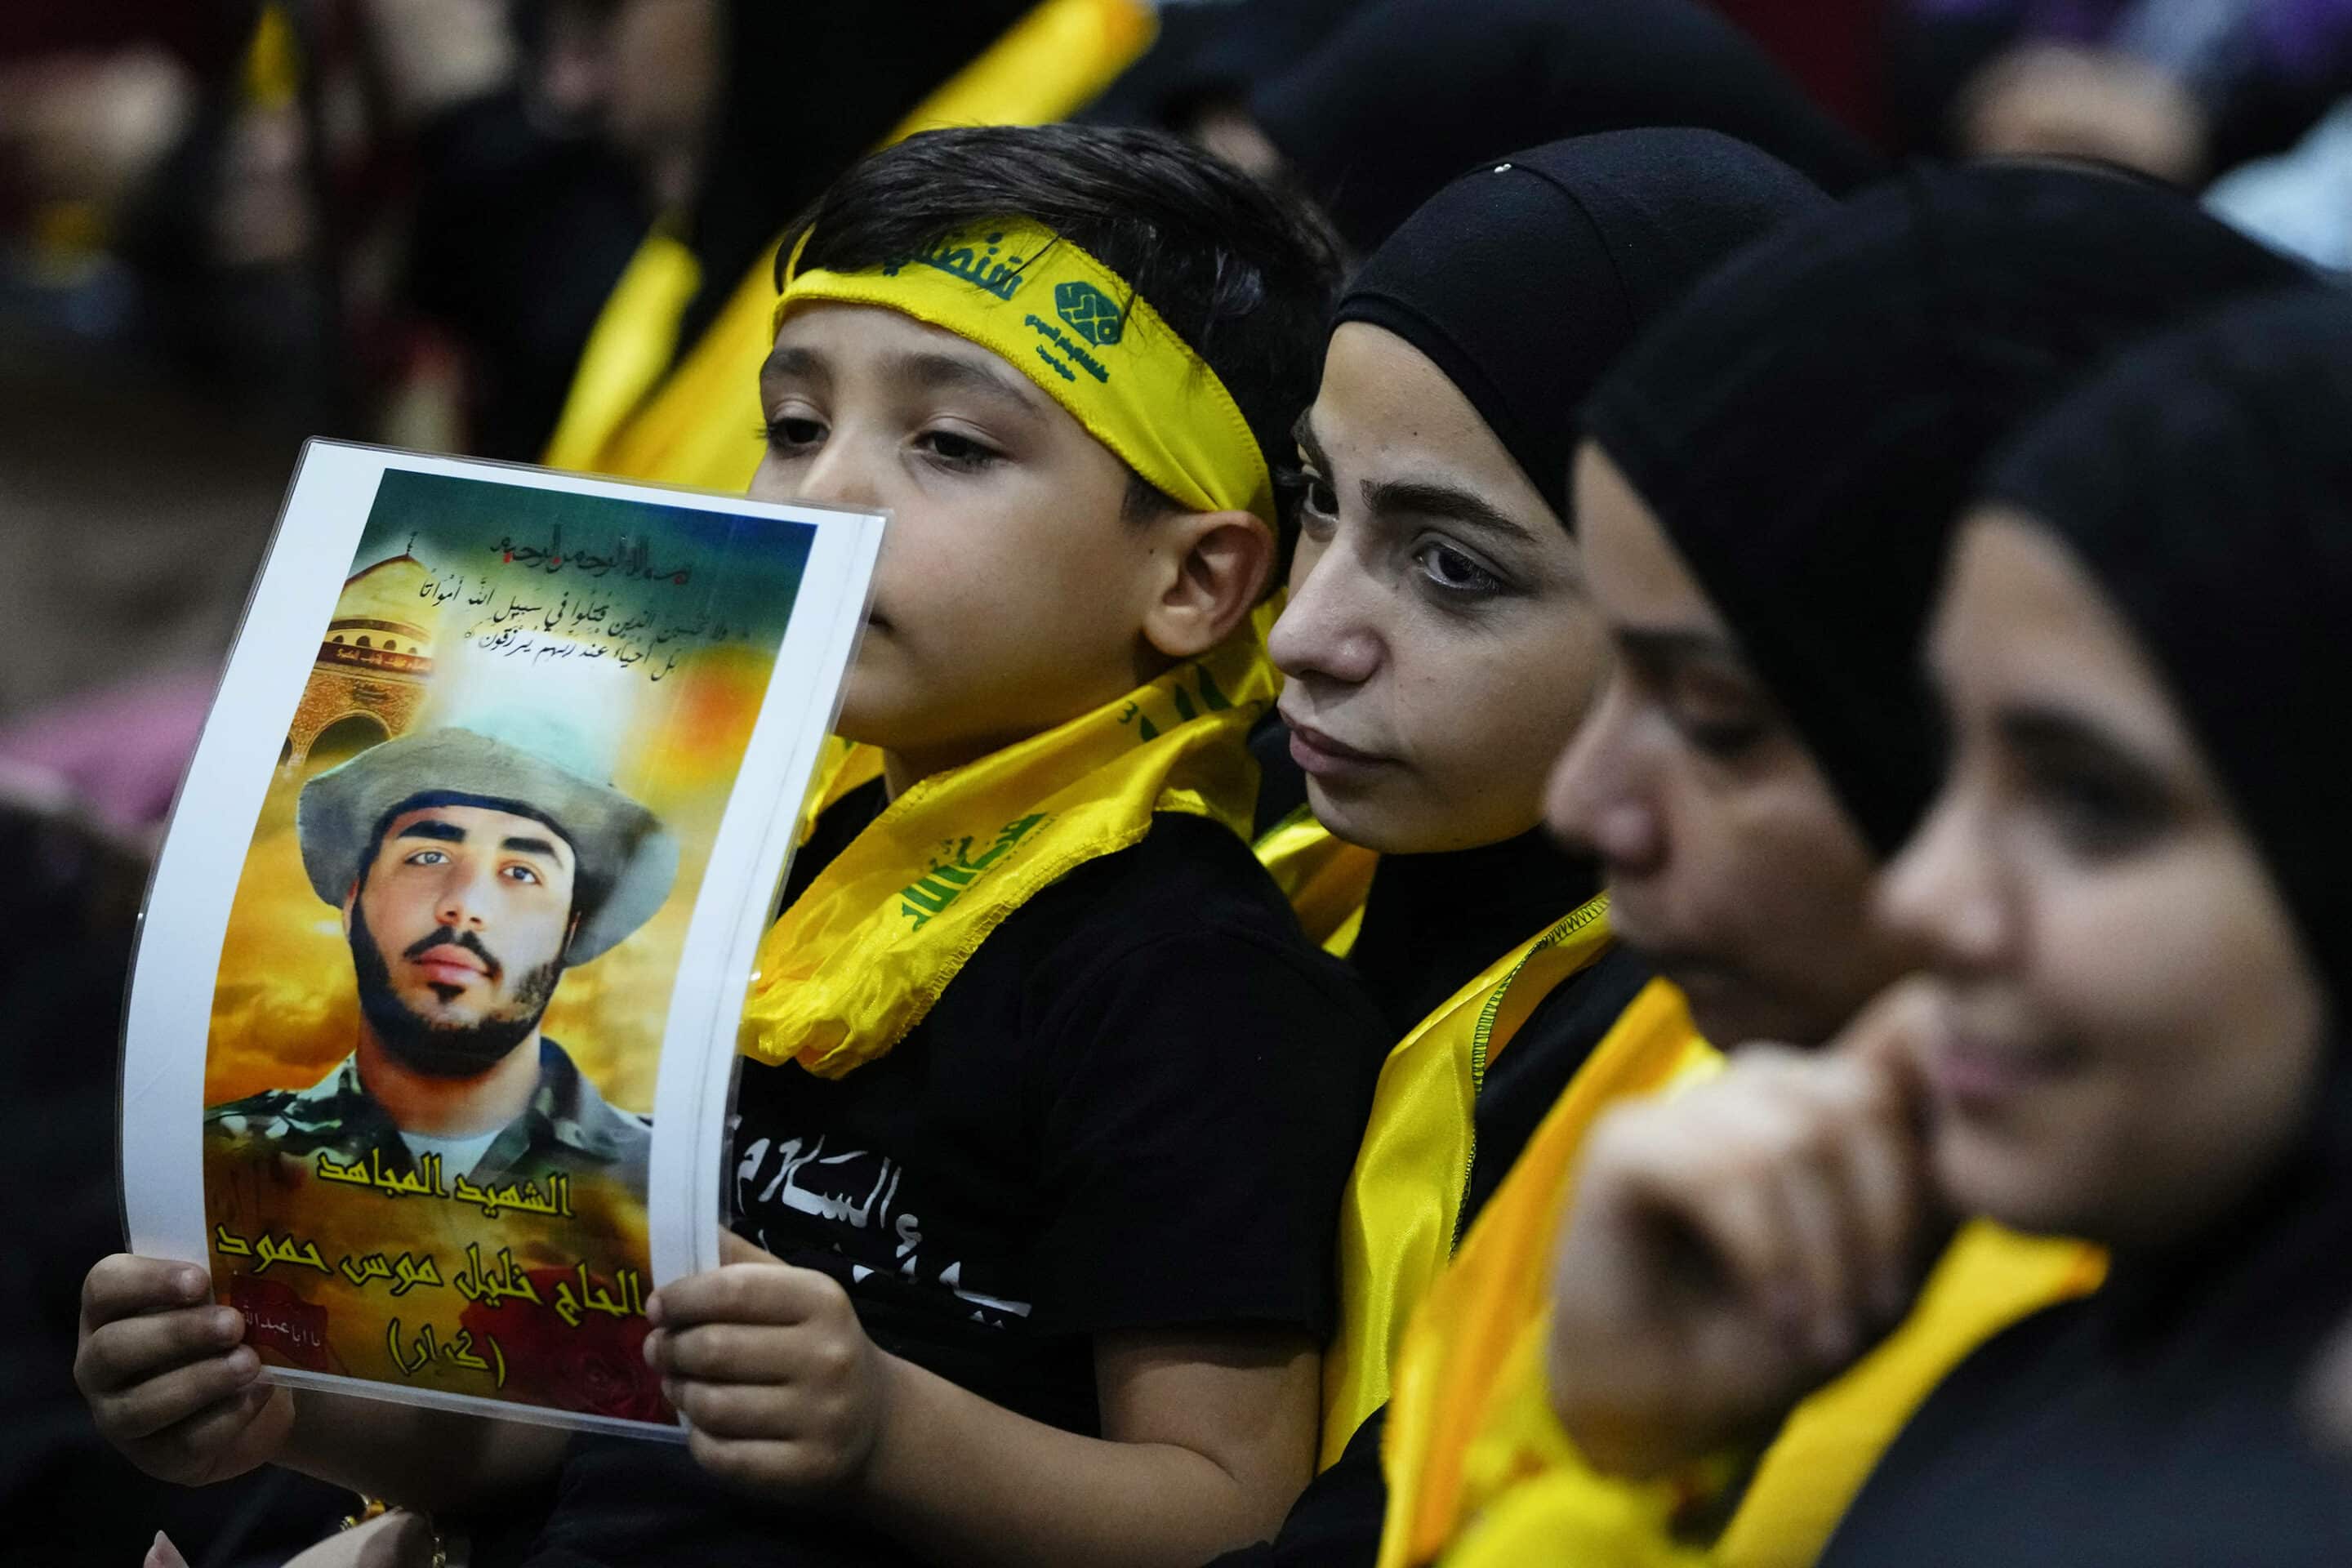 Hezbollah supporters hold pictures of their relatives who died. Southern Beirut suburb of Dahiyeh, Lebanon, Saturday, Nov. 11, 2023. (AP Photo/Hassan Ammar)/HAS116/23315545202509//2311111618